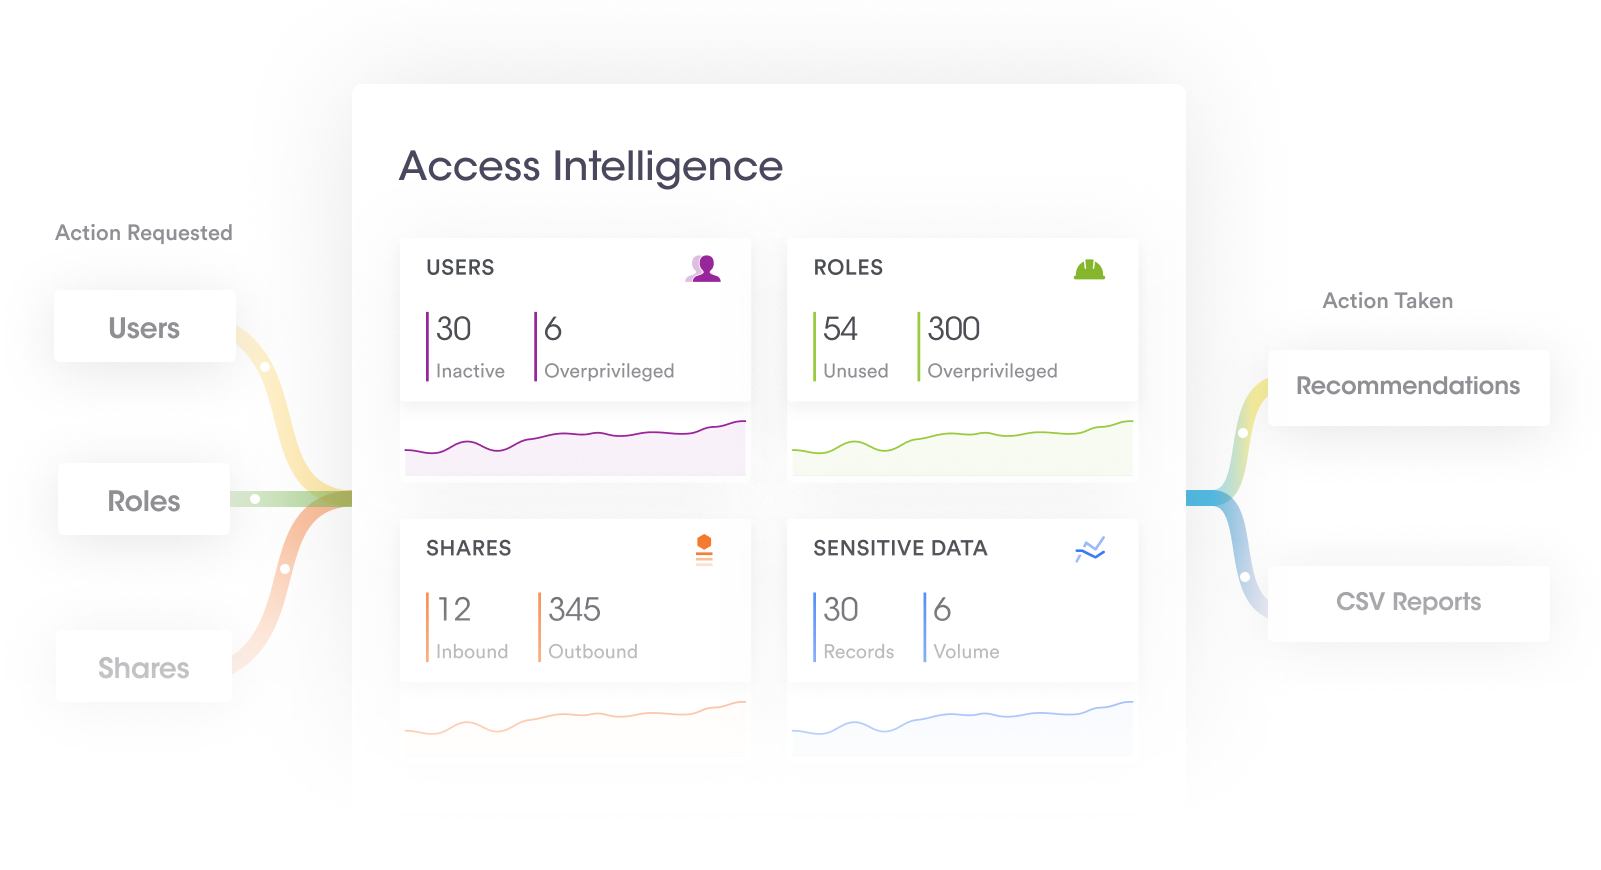 Automate Access Intelligence & Controls for Sensitive Data